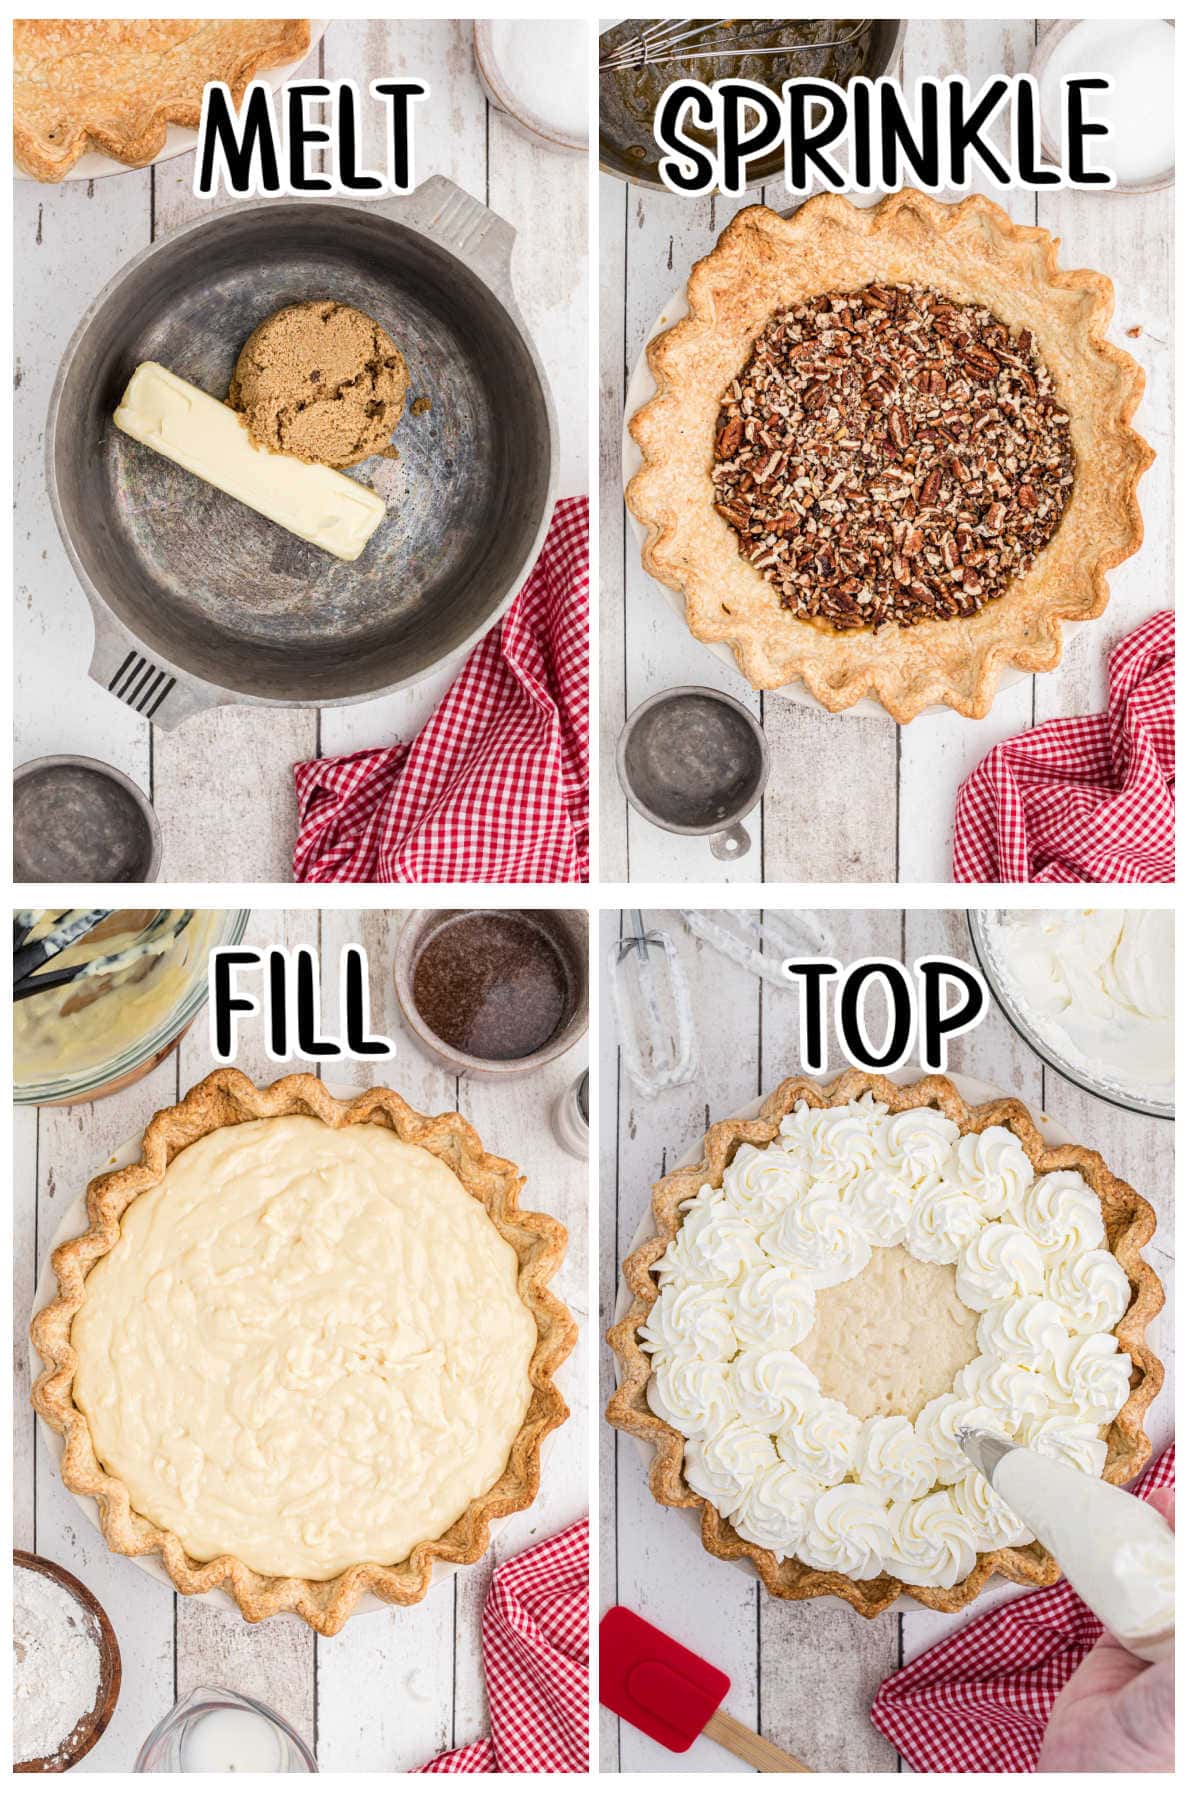 Step by step images showing how to make this pie.